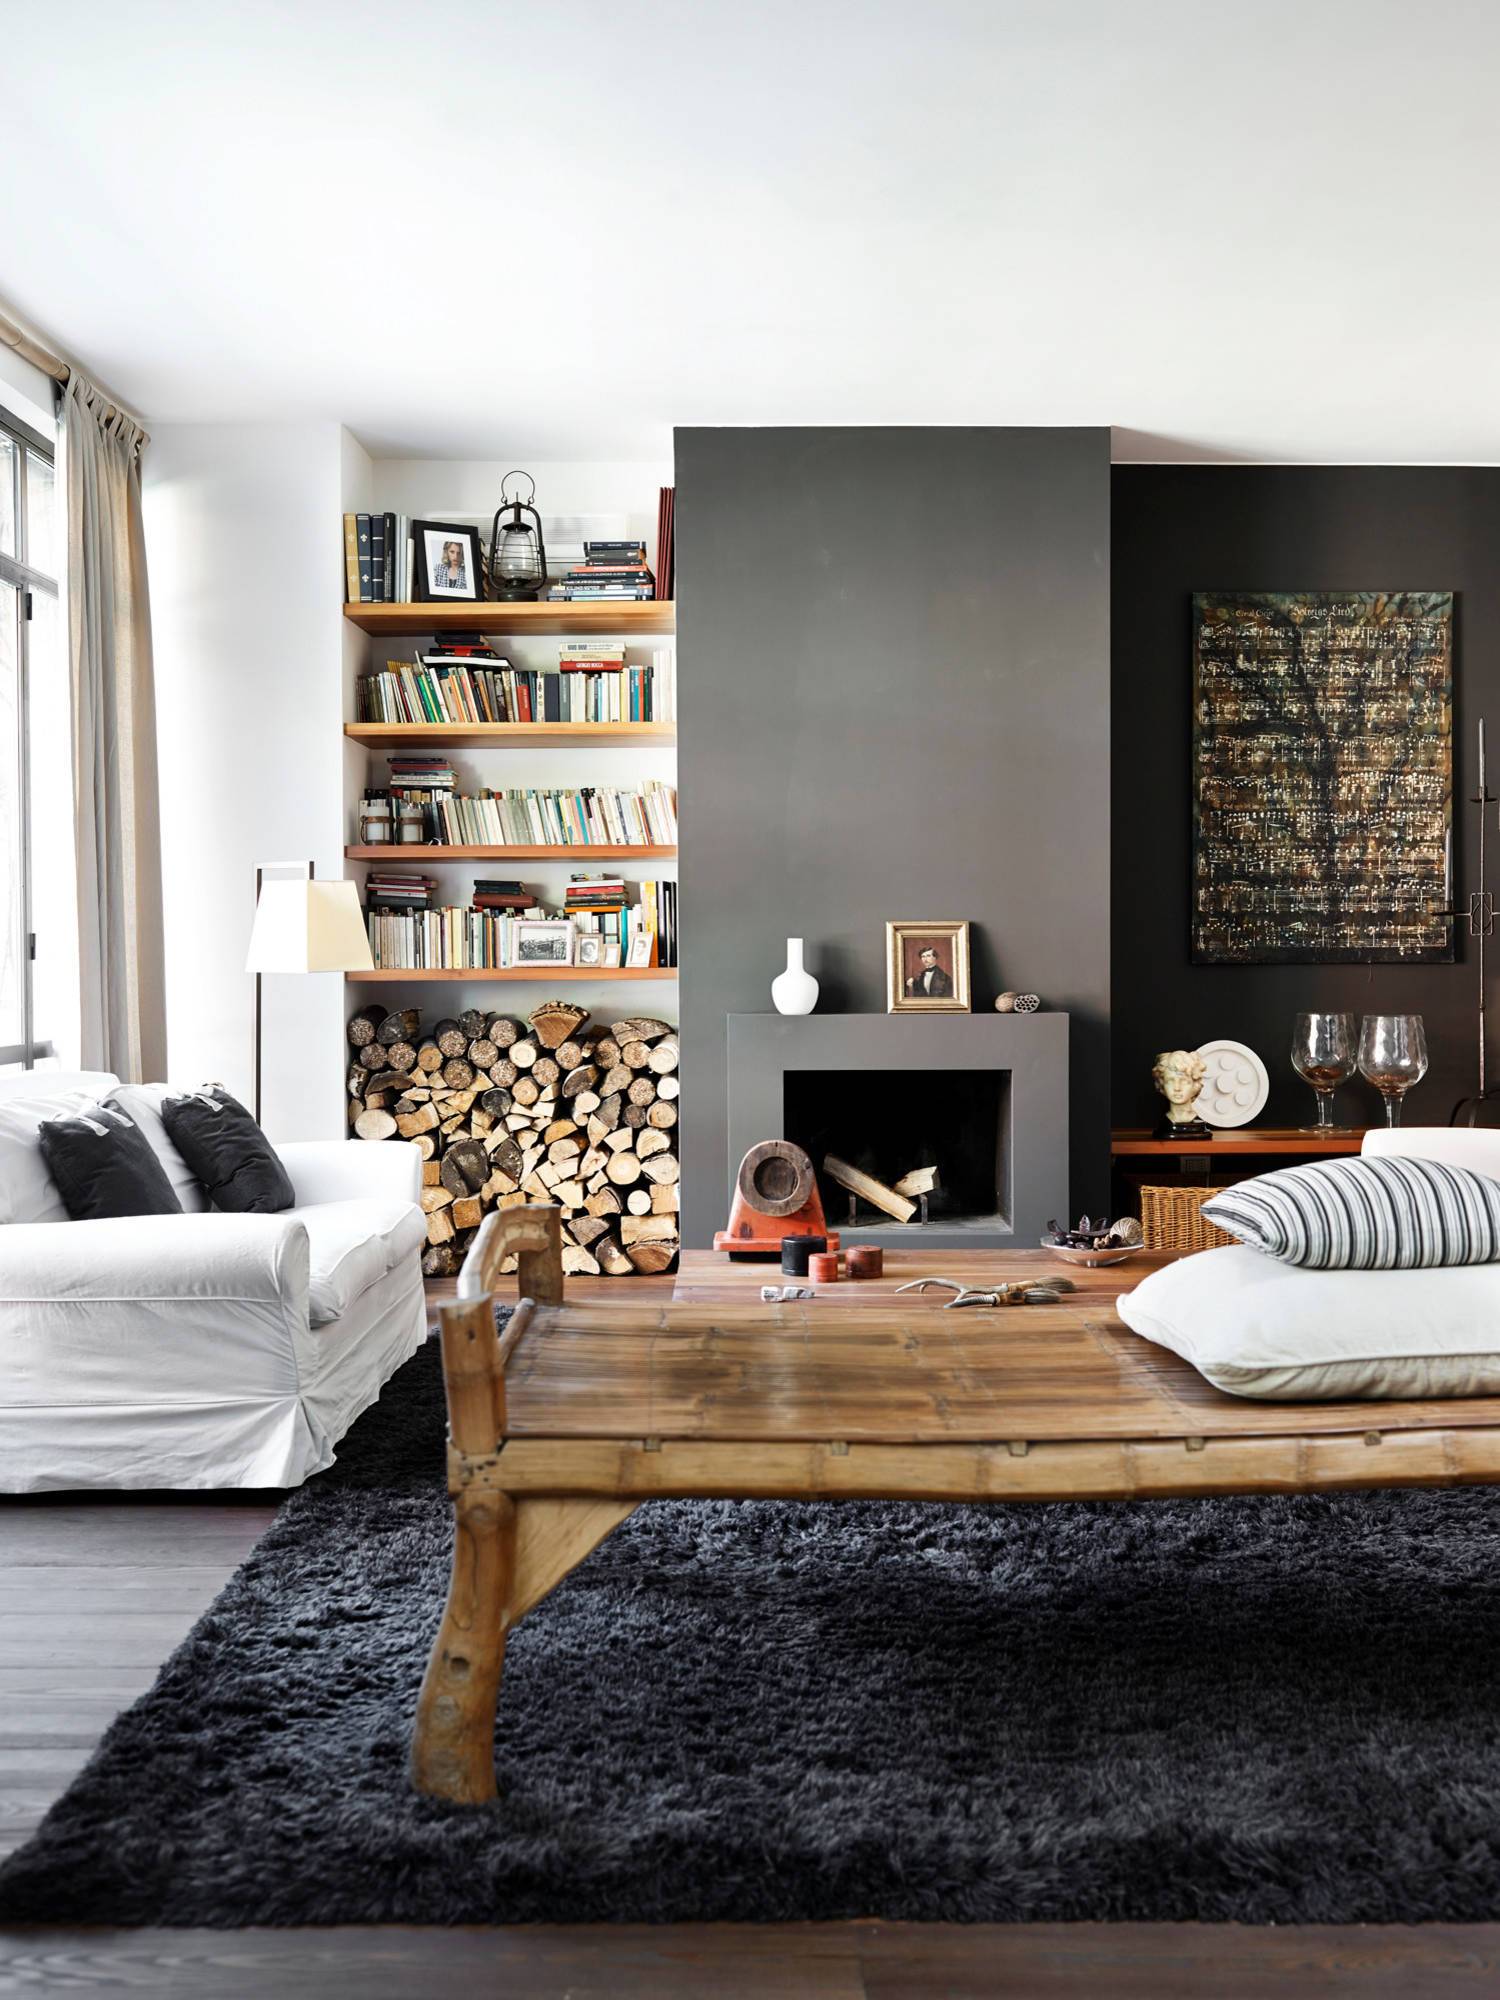 Mix of natural elements for a homey feel (from Houzz)